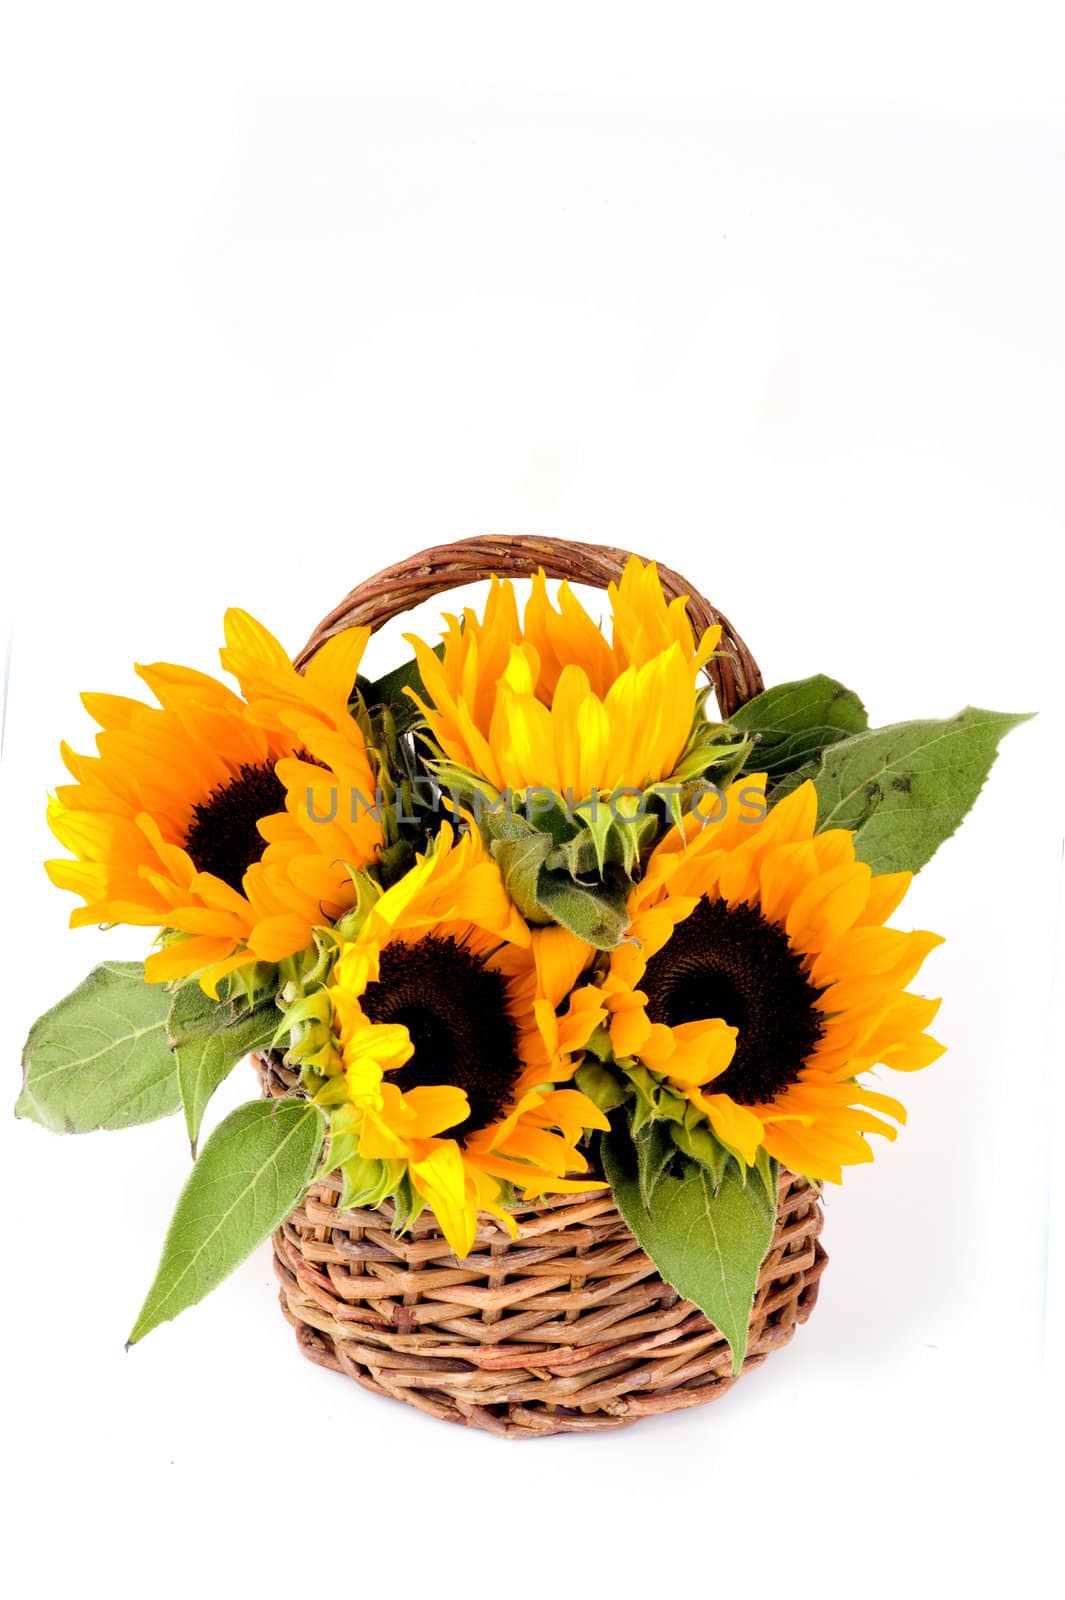 Four sunflowers in a basket